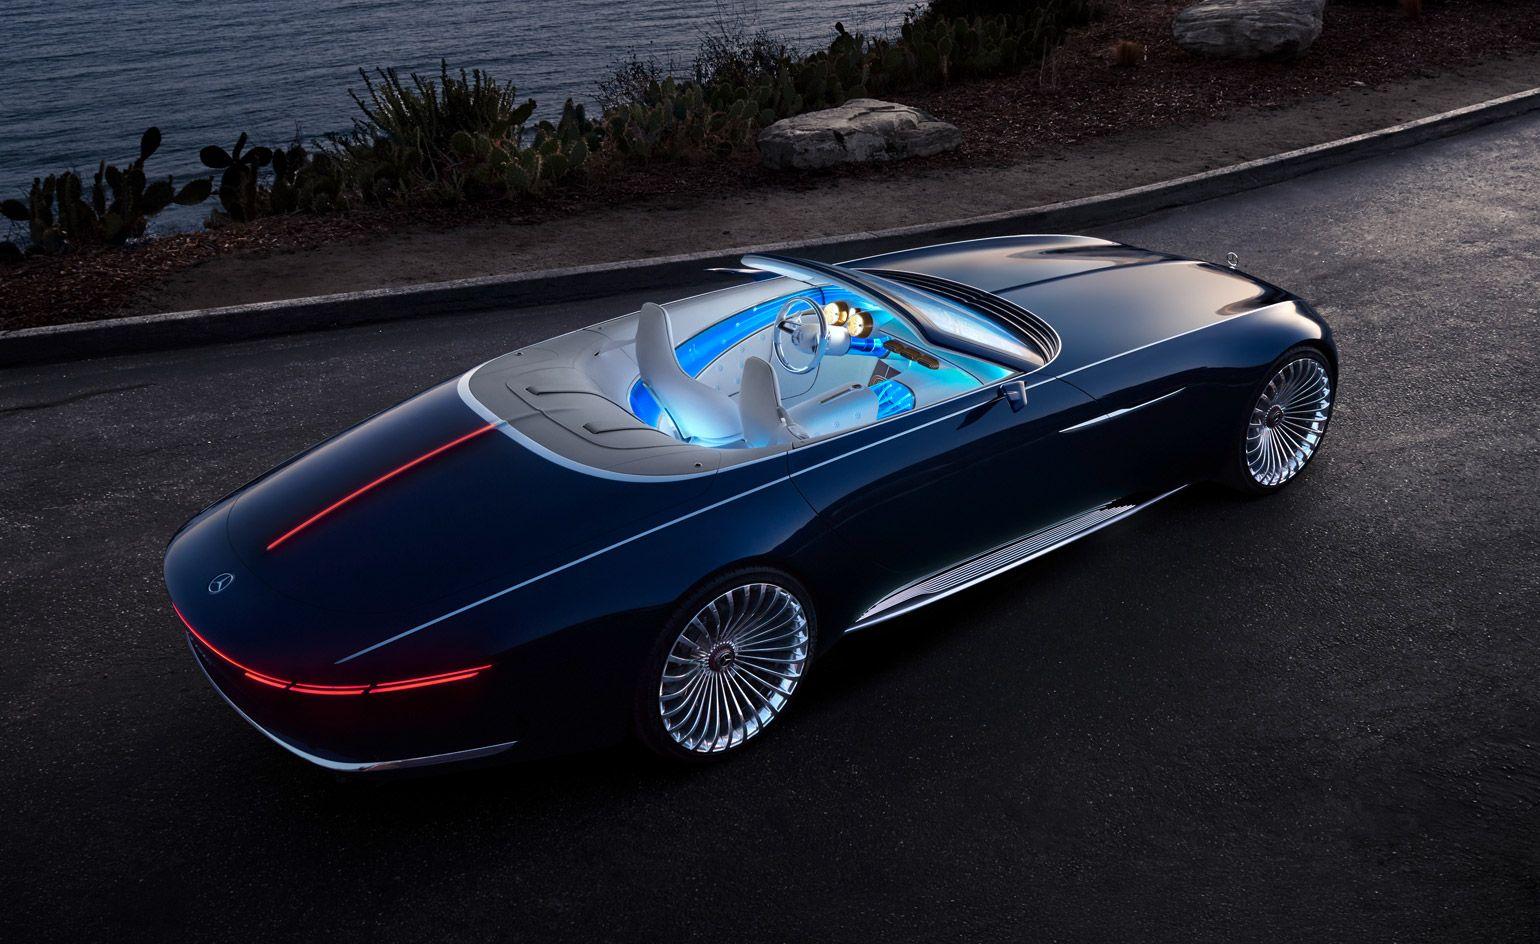 First Look: The Vision Mercedes Maybach 6 Cabriolet. Wallpaper*